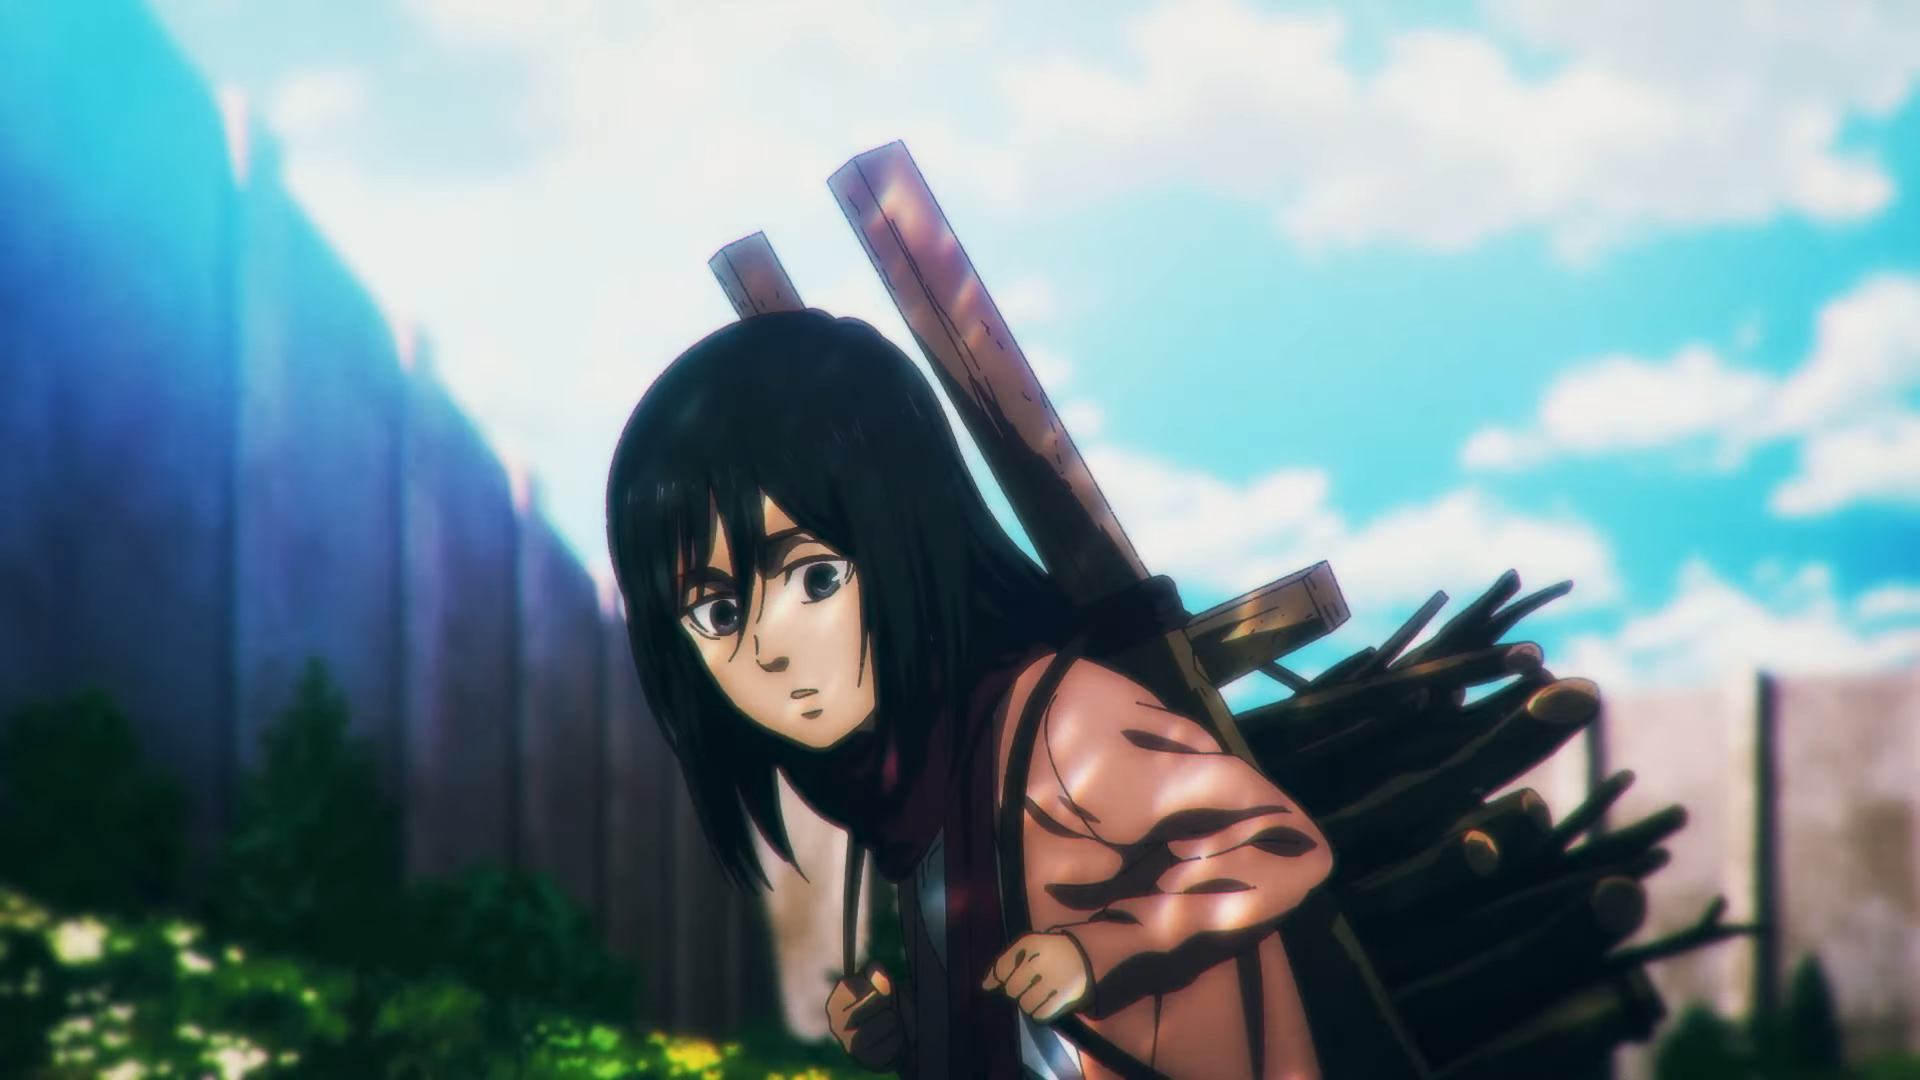 The AOT ending doesn't satisfy the fans. Can MAPPA change its ending? -  Quora